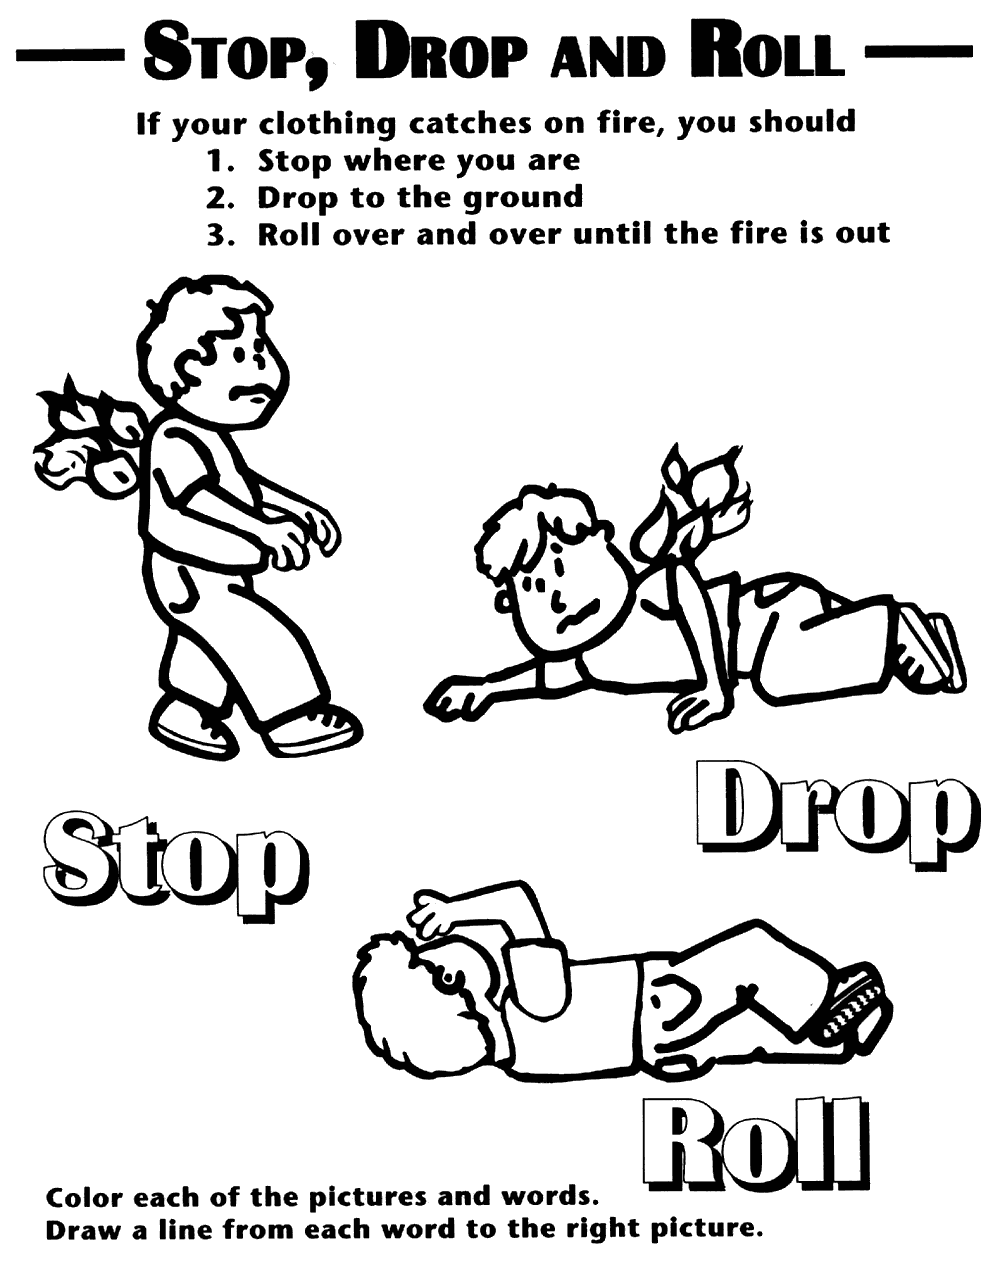 Printable coloring pages fire prevention coloring books fire safety for kids fire safety activities fire safety preschool